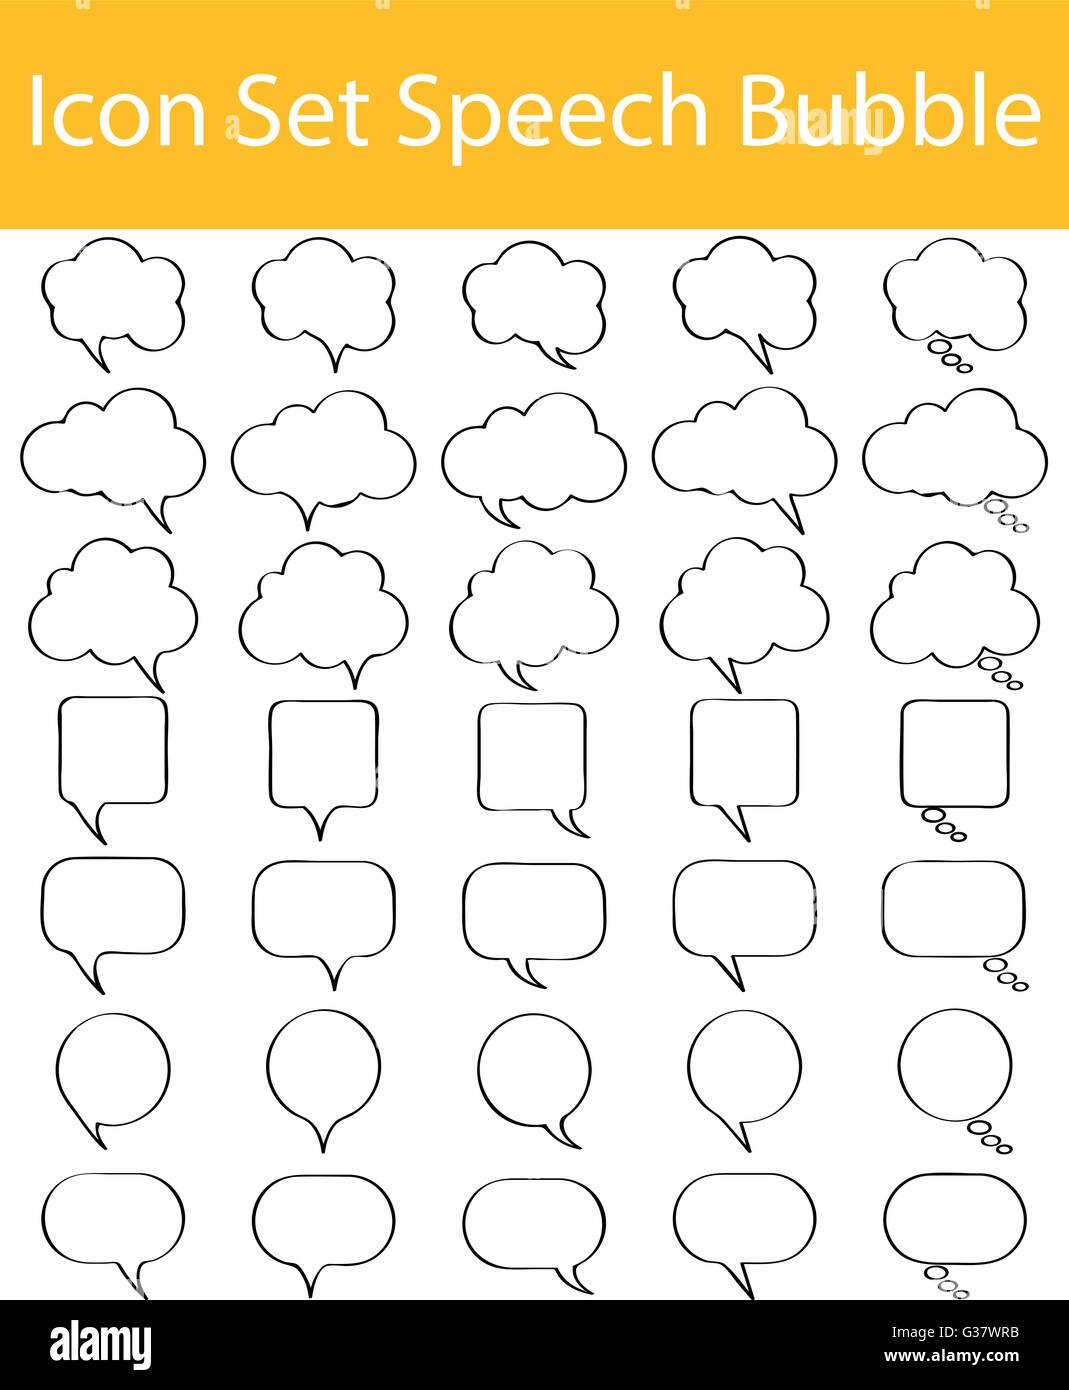 Drawn Doodle Lined Icon Set Speech Bubble with 35 icons for the creative use in graphic design Stock Vector